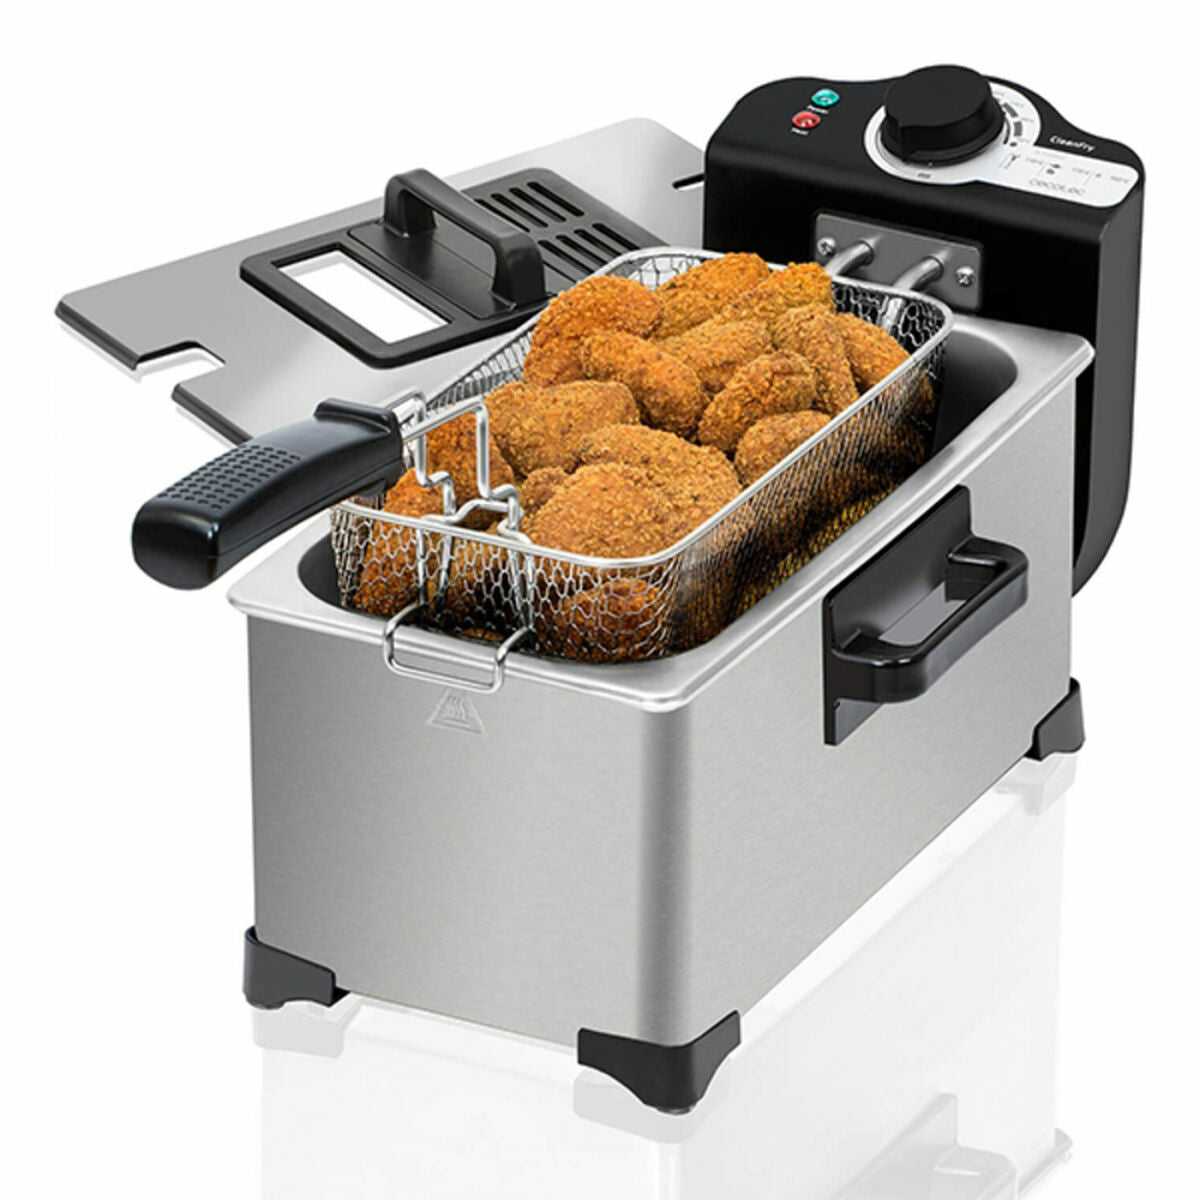 Fritteuse Cecotec Cleanfry 3L 2000W Edelstahl - CA International 